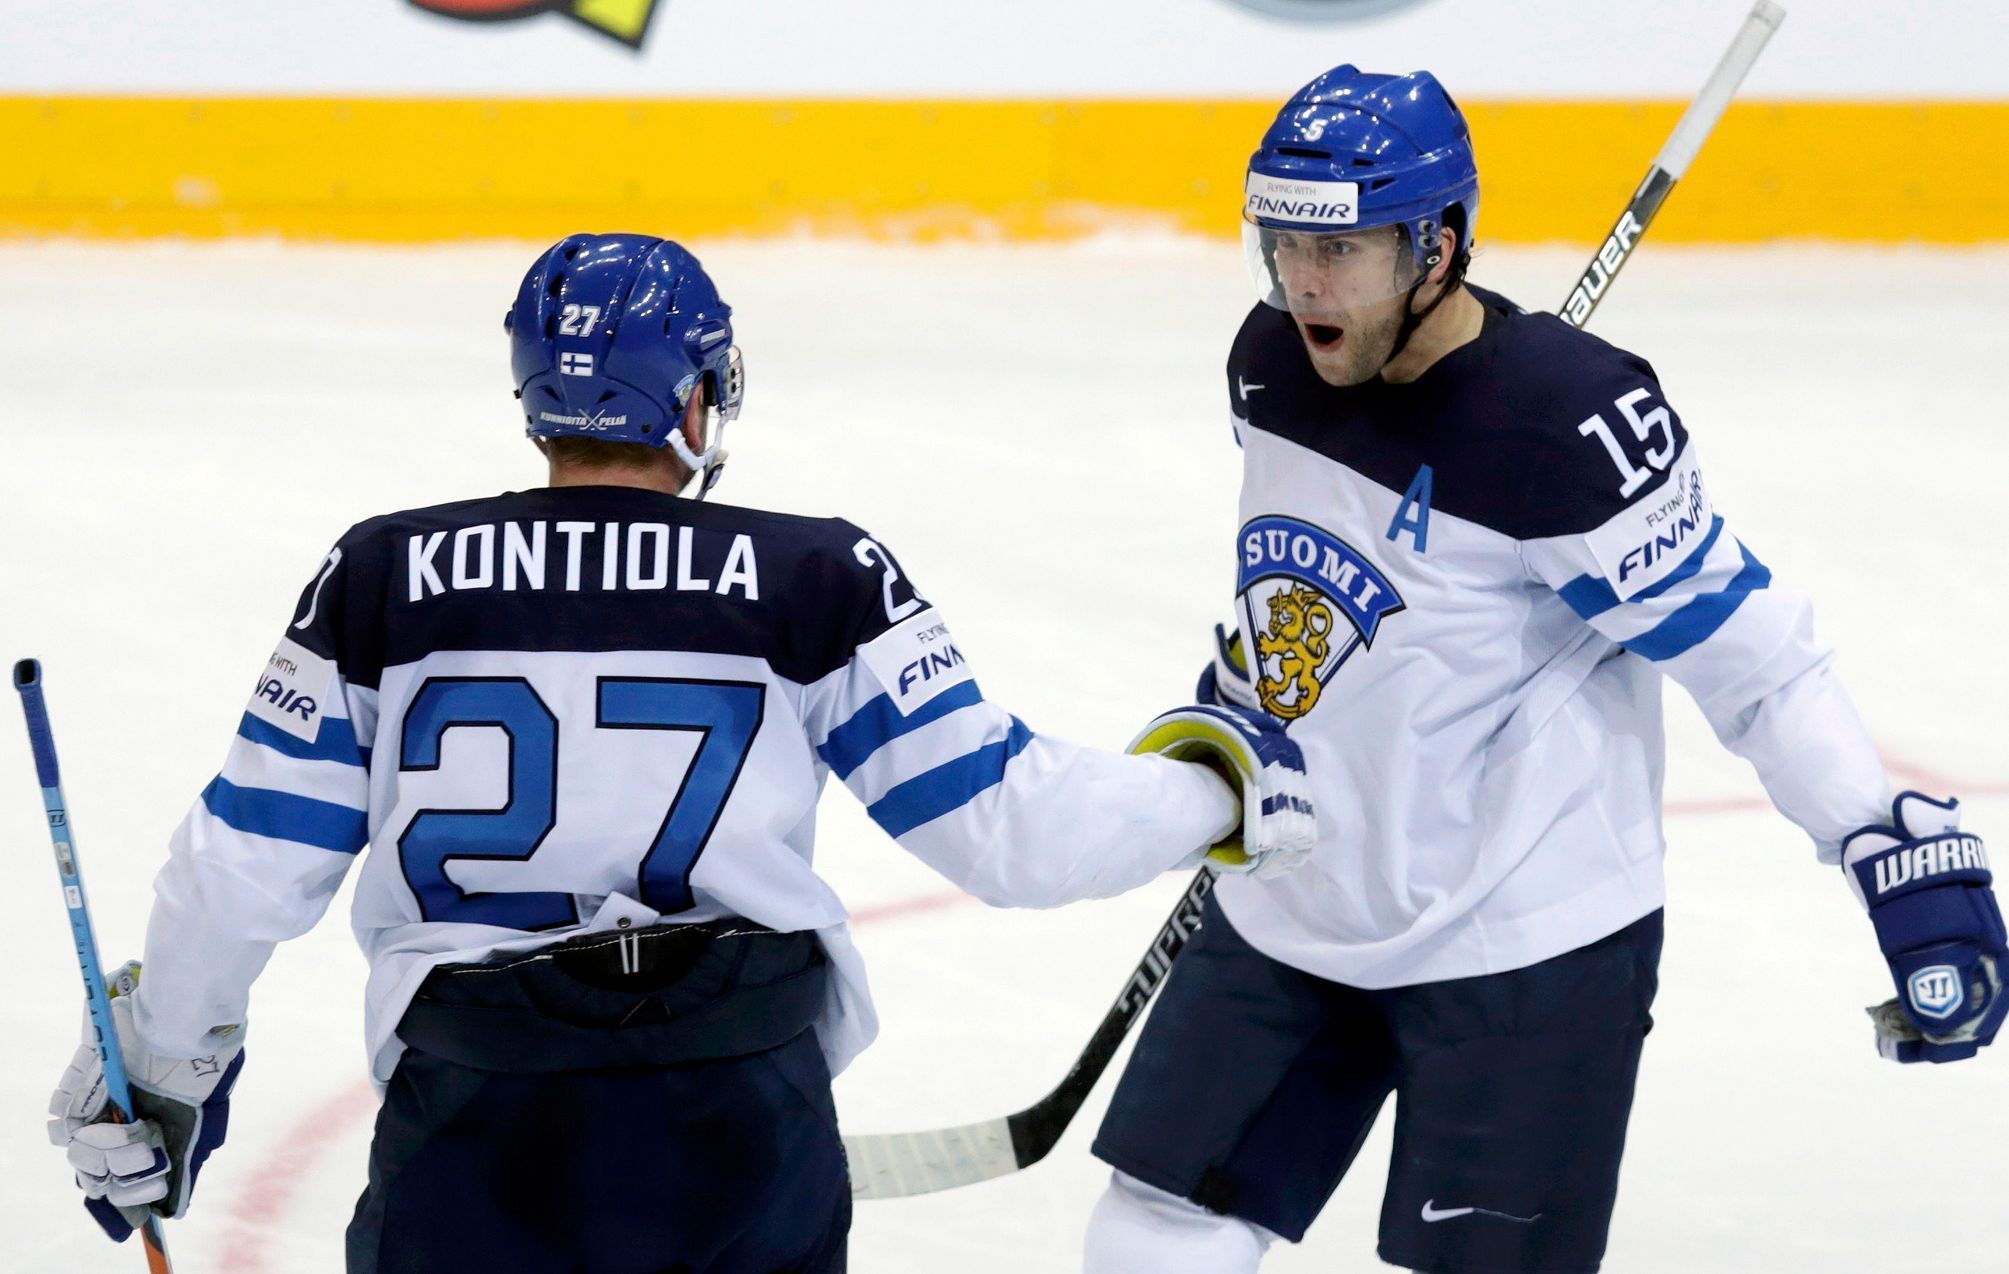 Finland's Ruutu celebrates with his teammate Kontiola after scoring a goal against the Czech Republic during their Ice Hockey World Championship quarterfinal game at the O2 arena in Prague